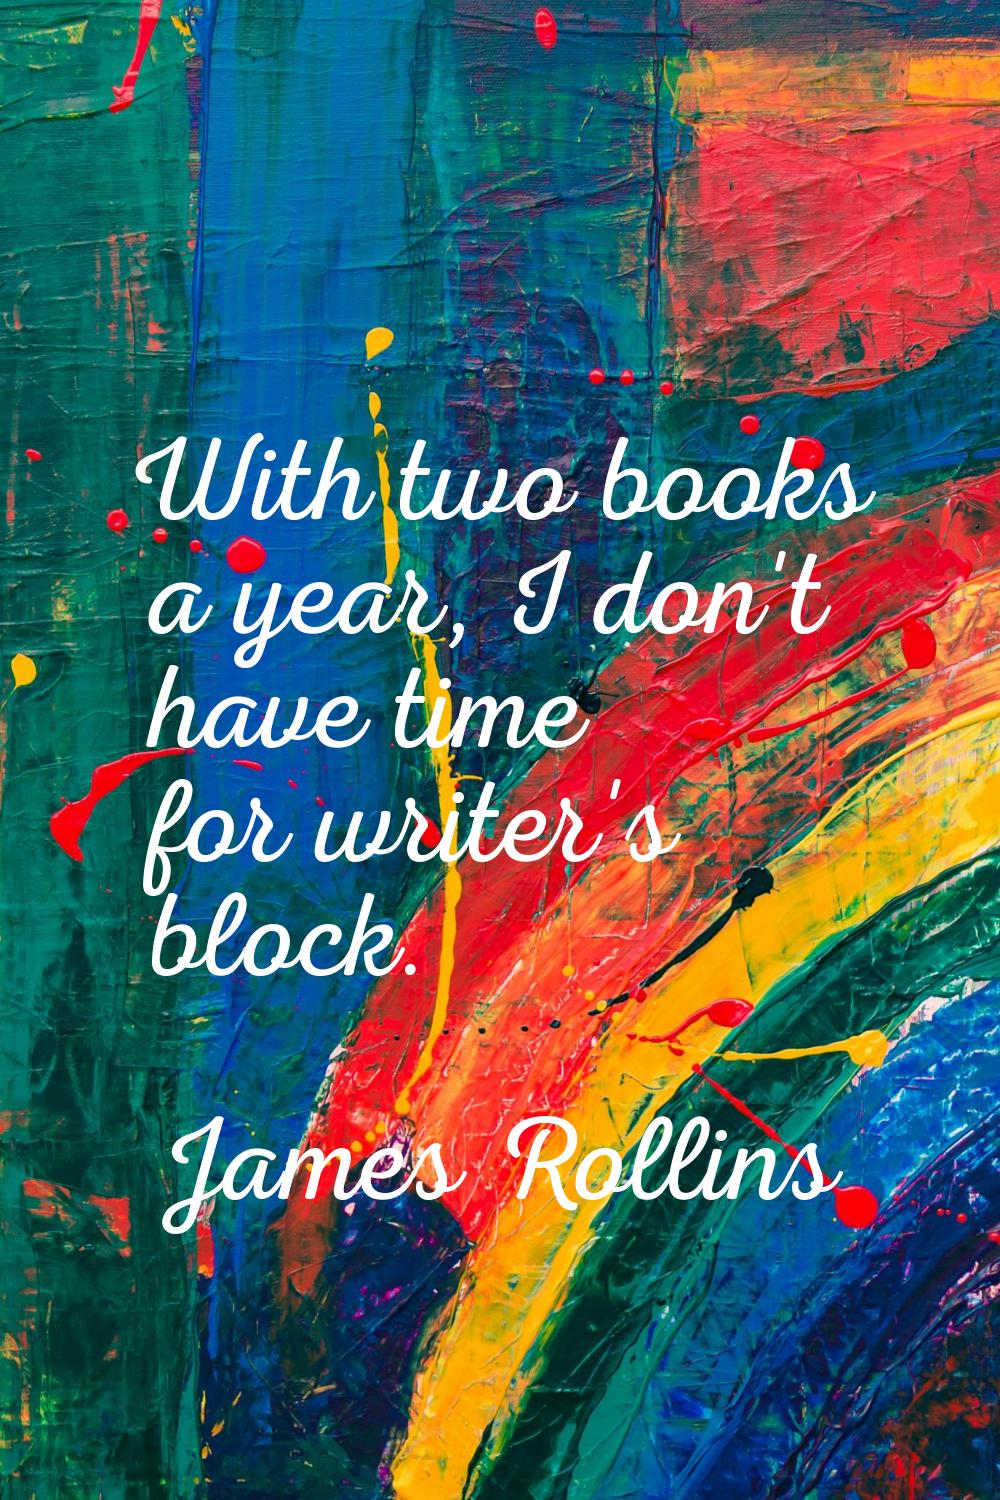 With two books a year, I don't have time for writer's block.